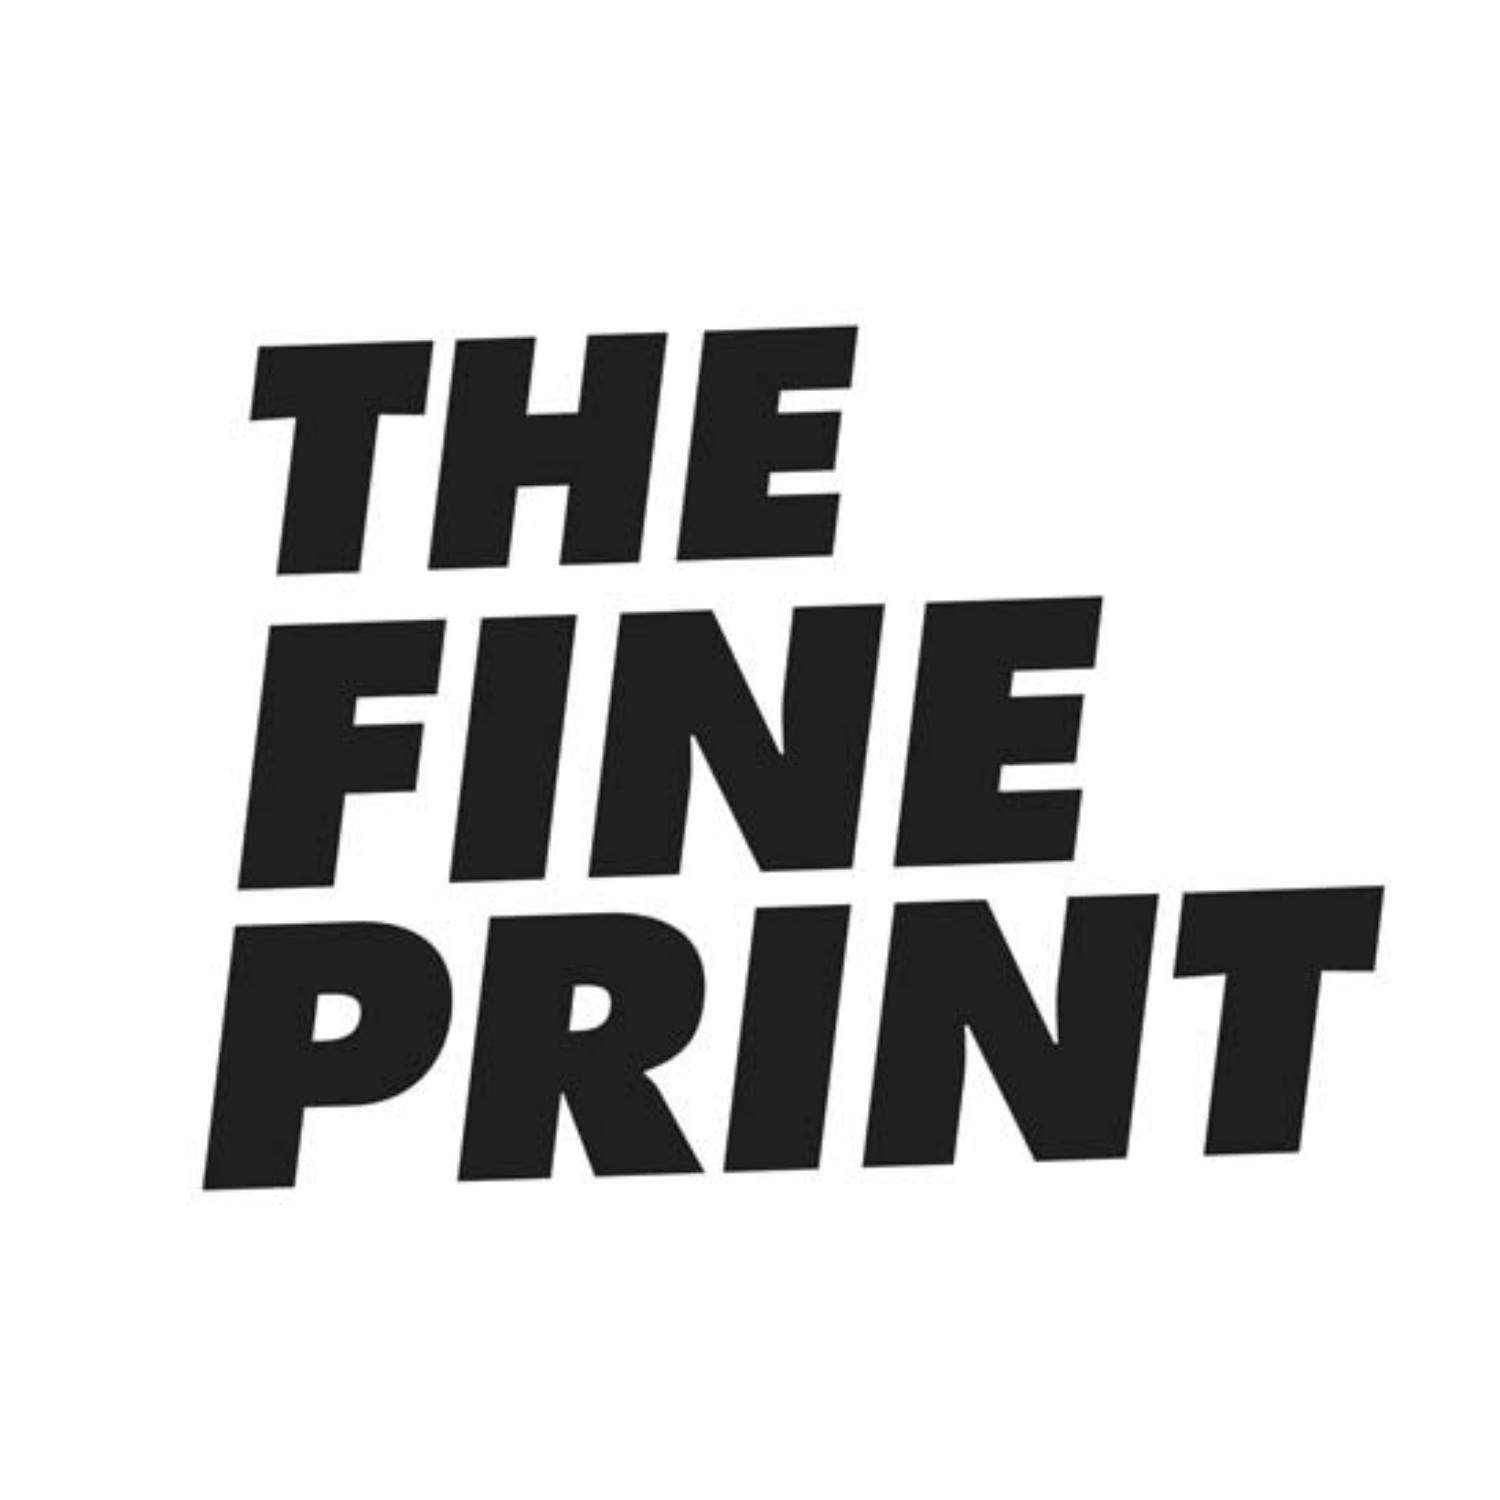 FinePrint 11.40 download the last version for android